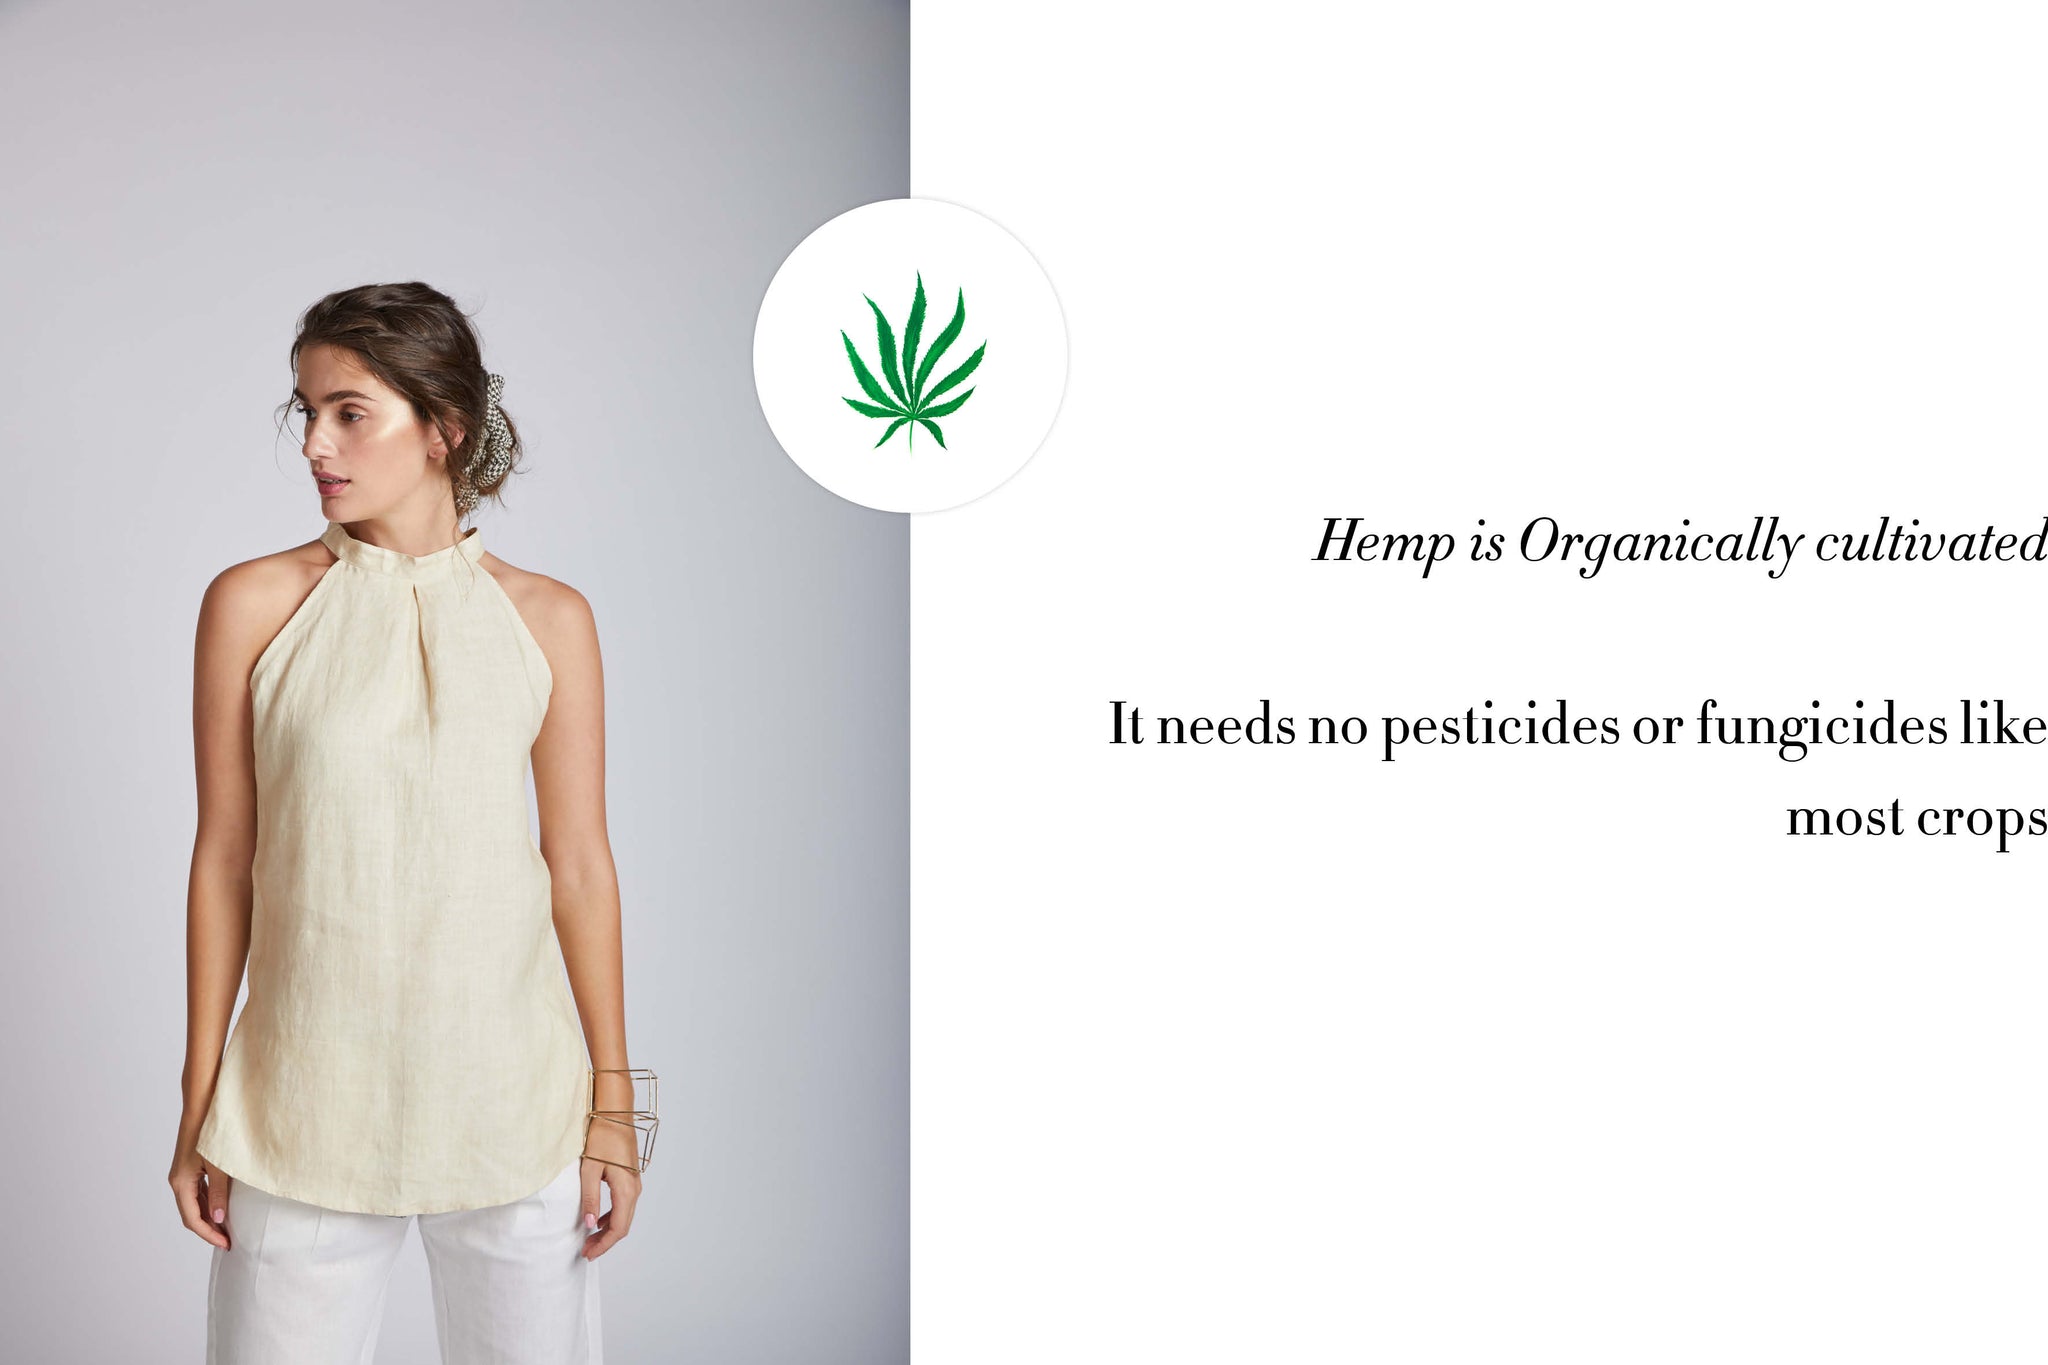 Hemp is organically cultivated . It needs no pesticides or fungicides like most crops